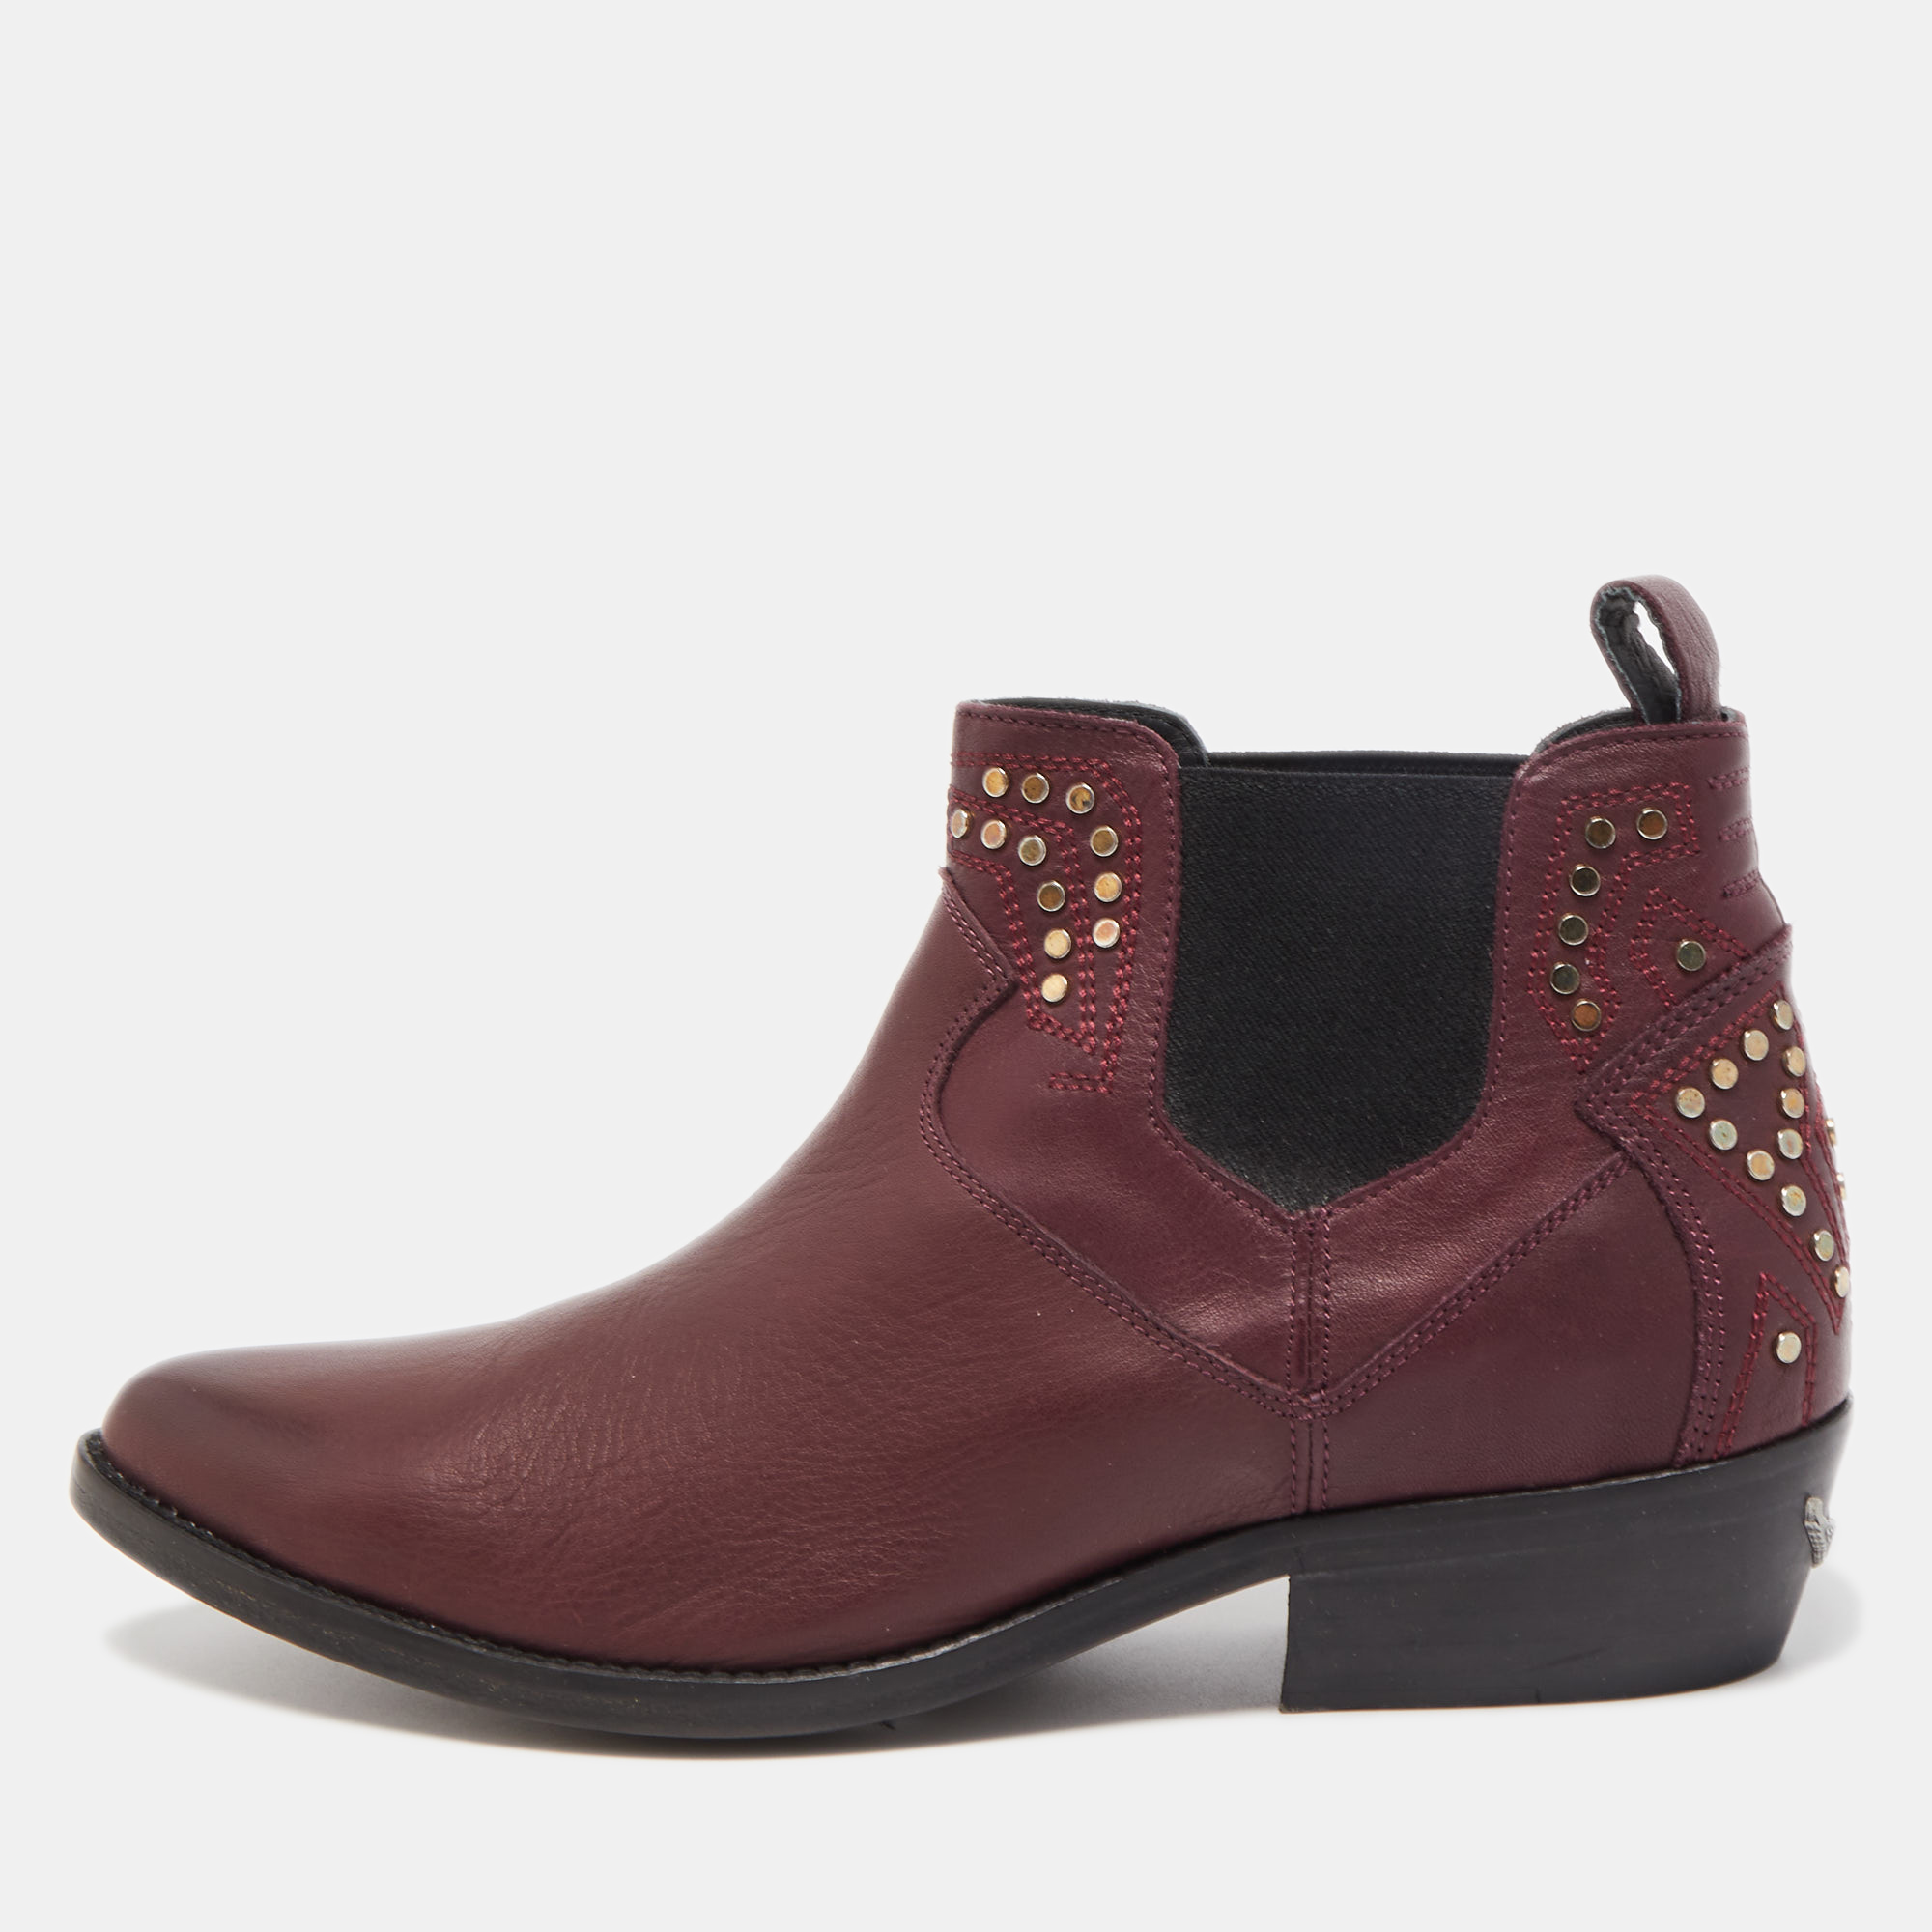 Zadig And Voltaire Burgundy Leather Studded Pointed Toe Ankle Boots Size 40